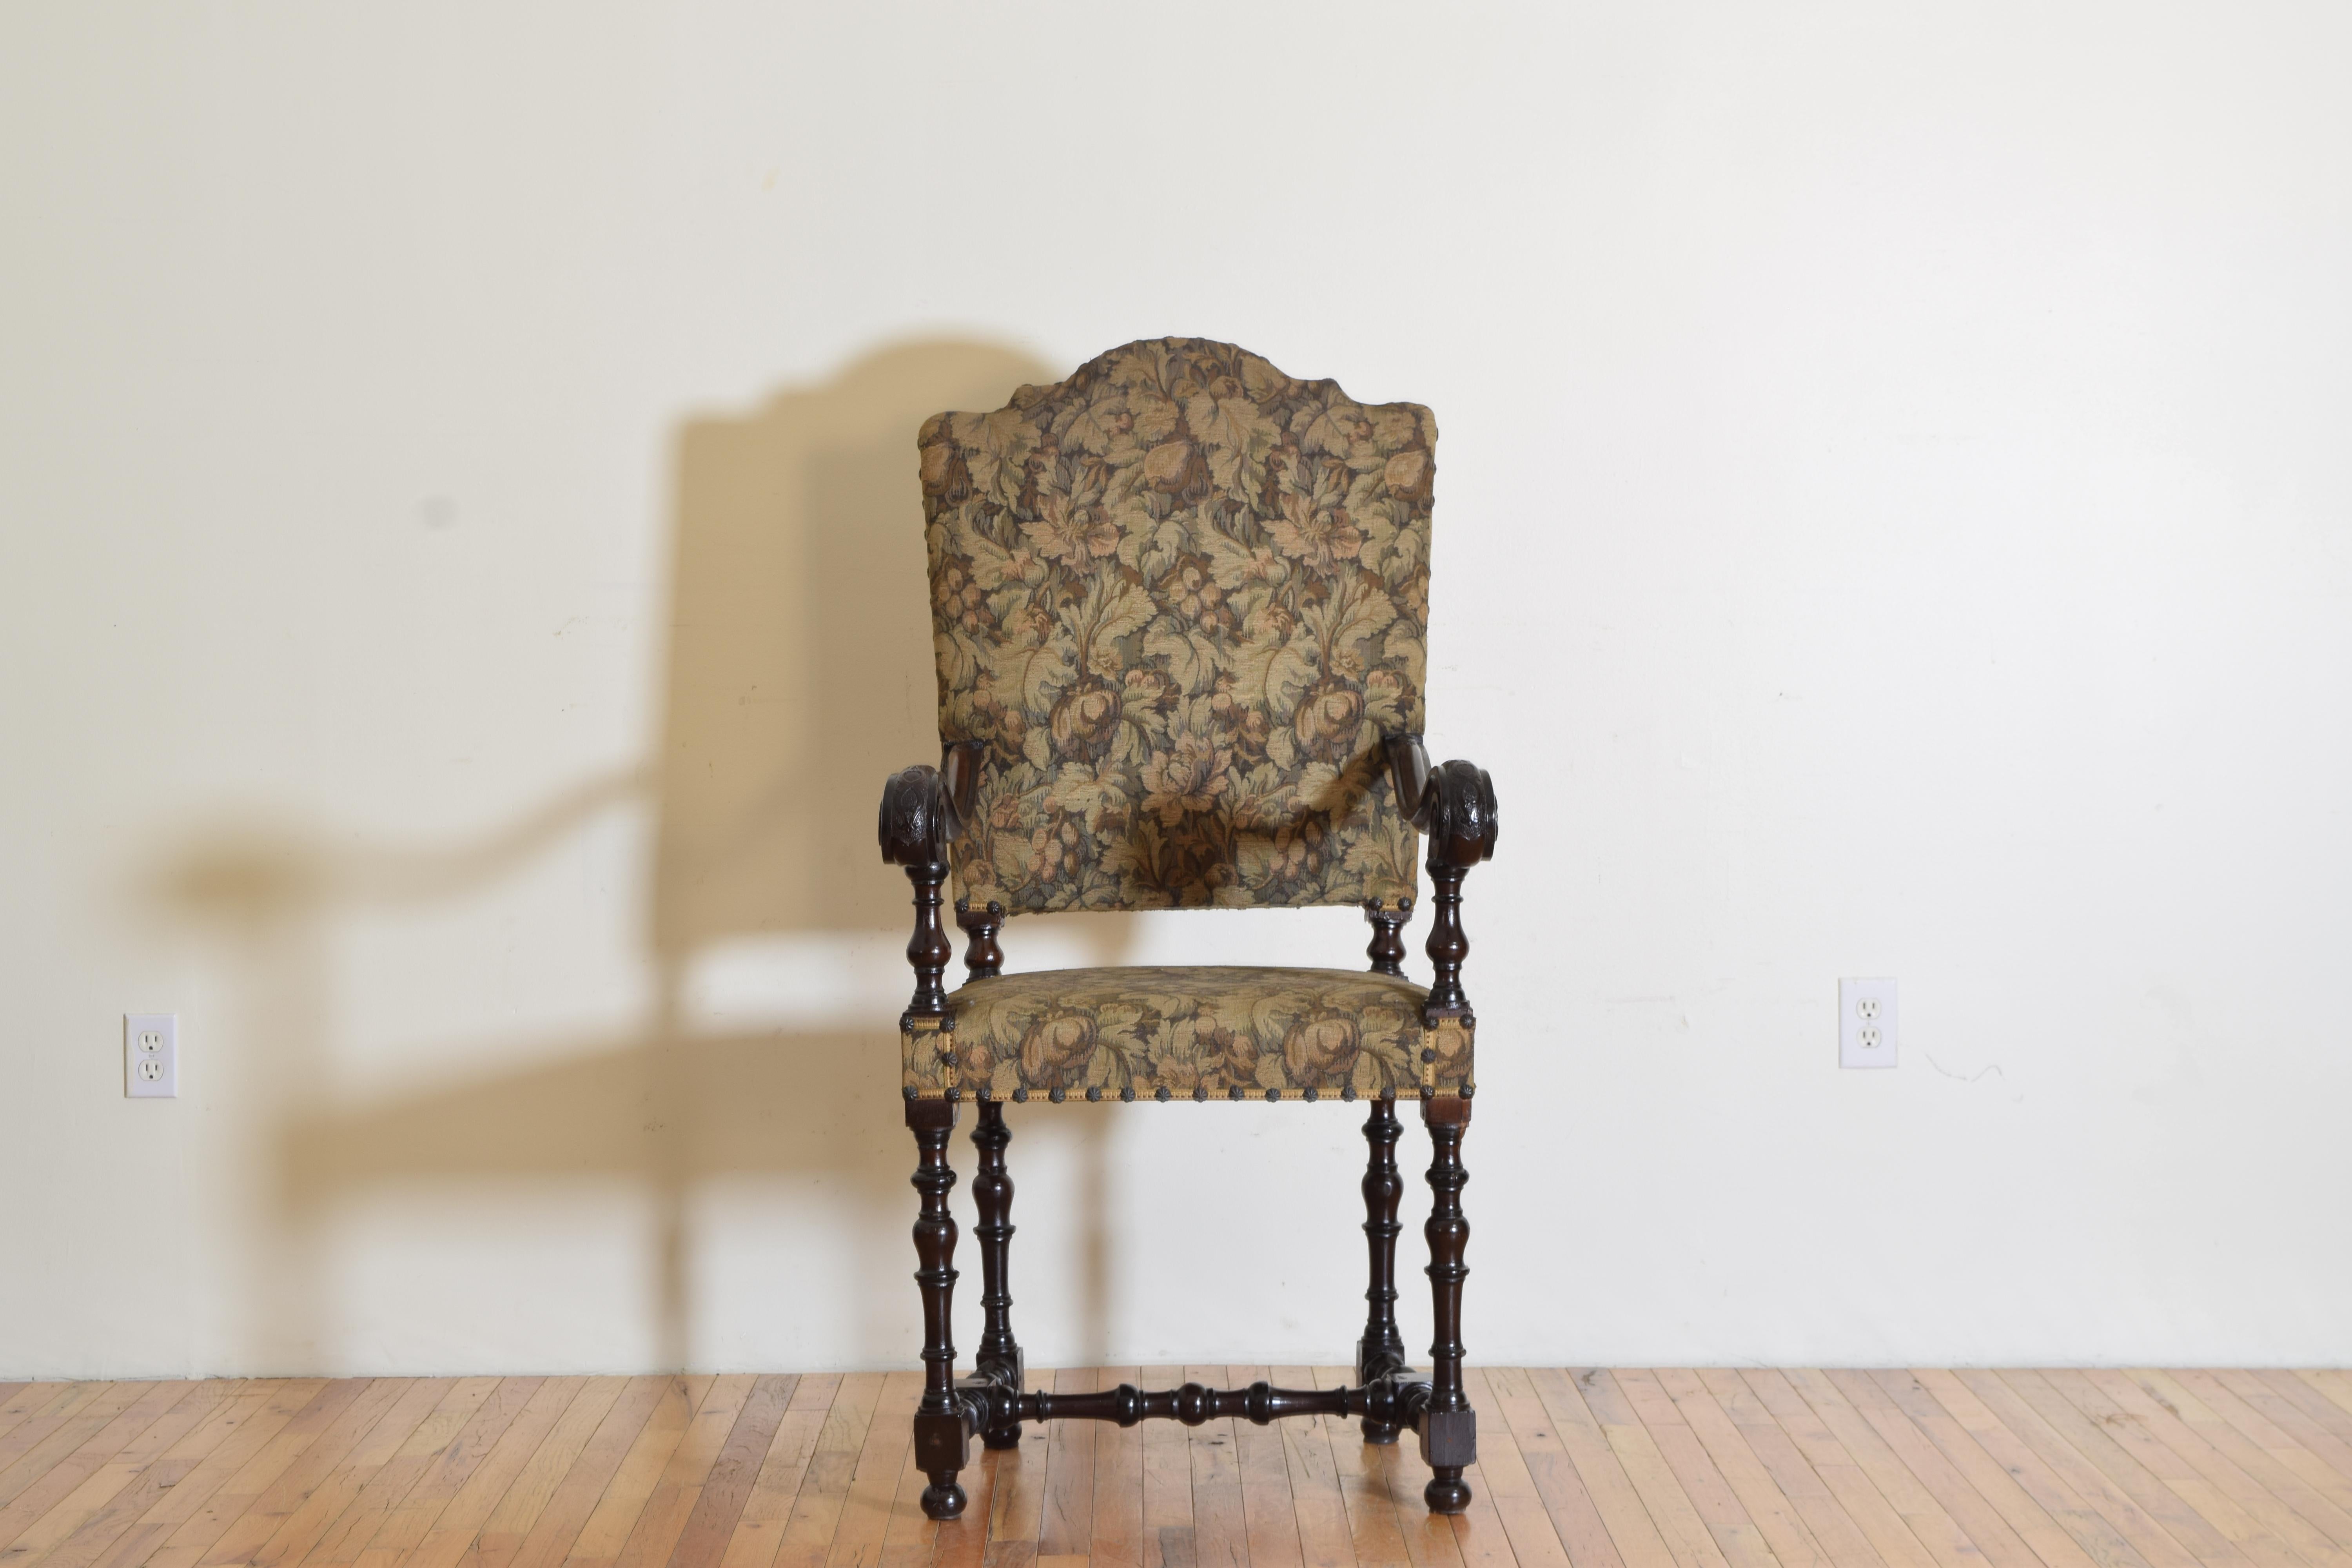 Italian, Emiliana, Baroque Large Carved & Shaped Walnut Open Armchair, ca. 1680 In Good Condition For Sale In Atlanta, GA